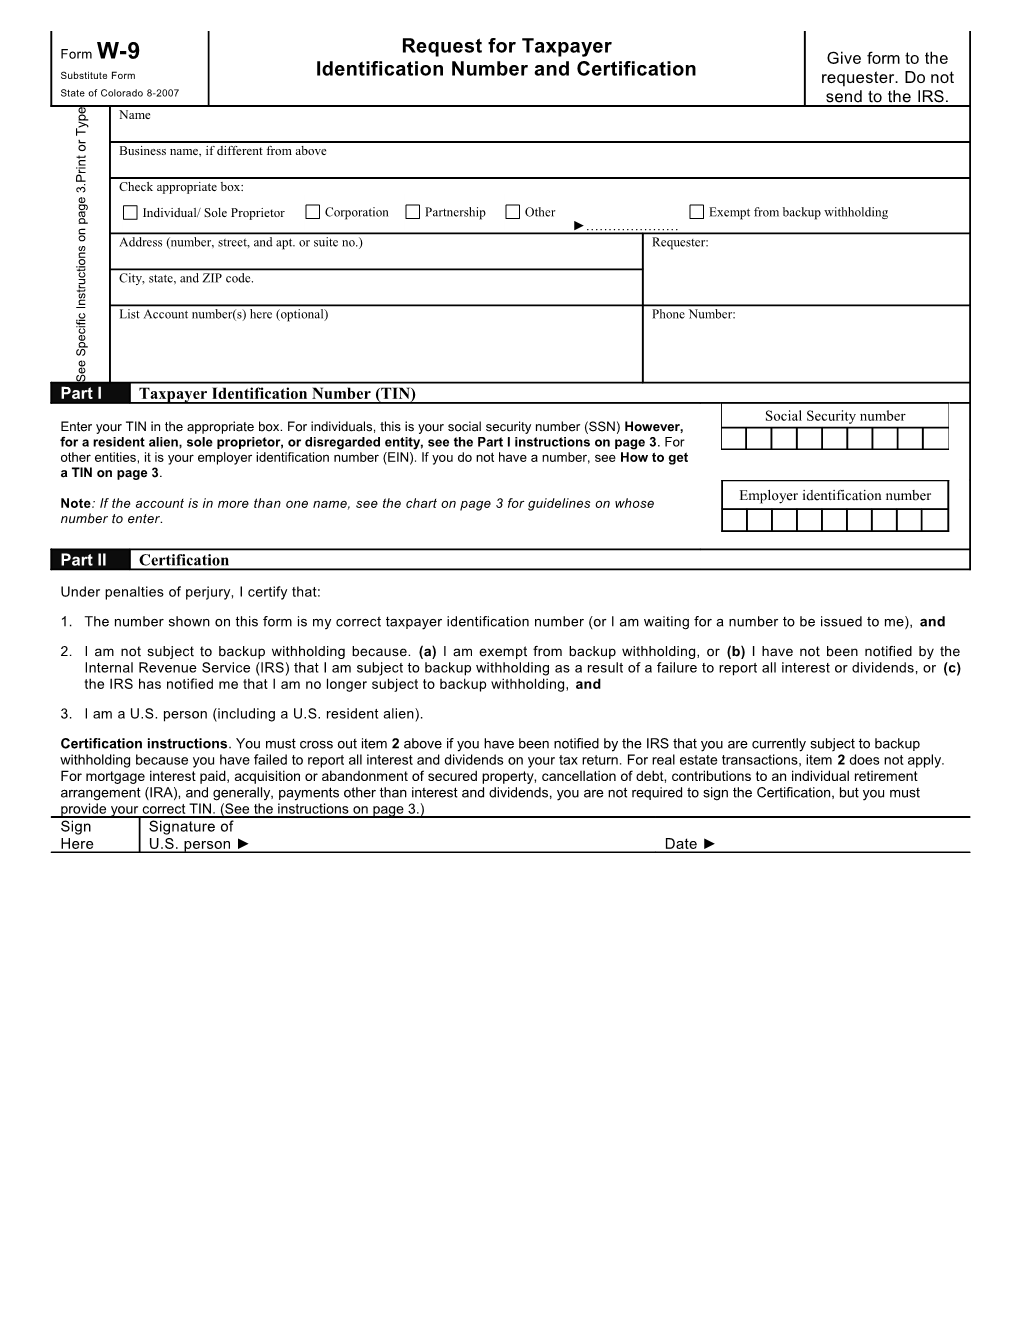 Give Form to the Requester. Do Not Send to the IRS